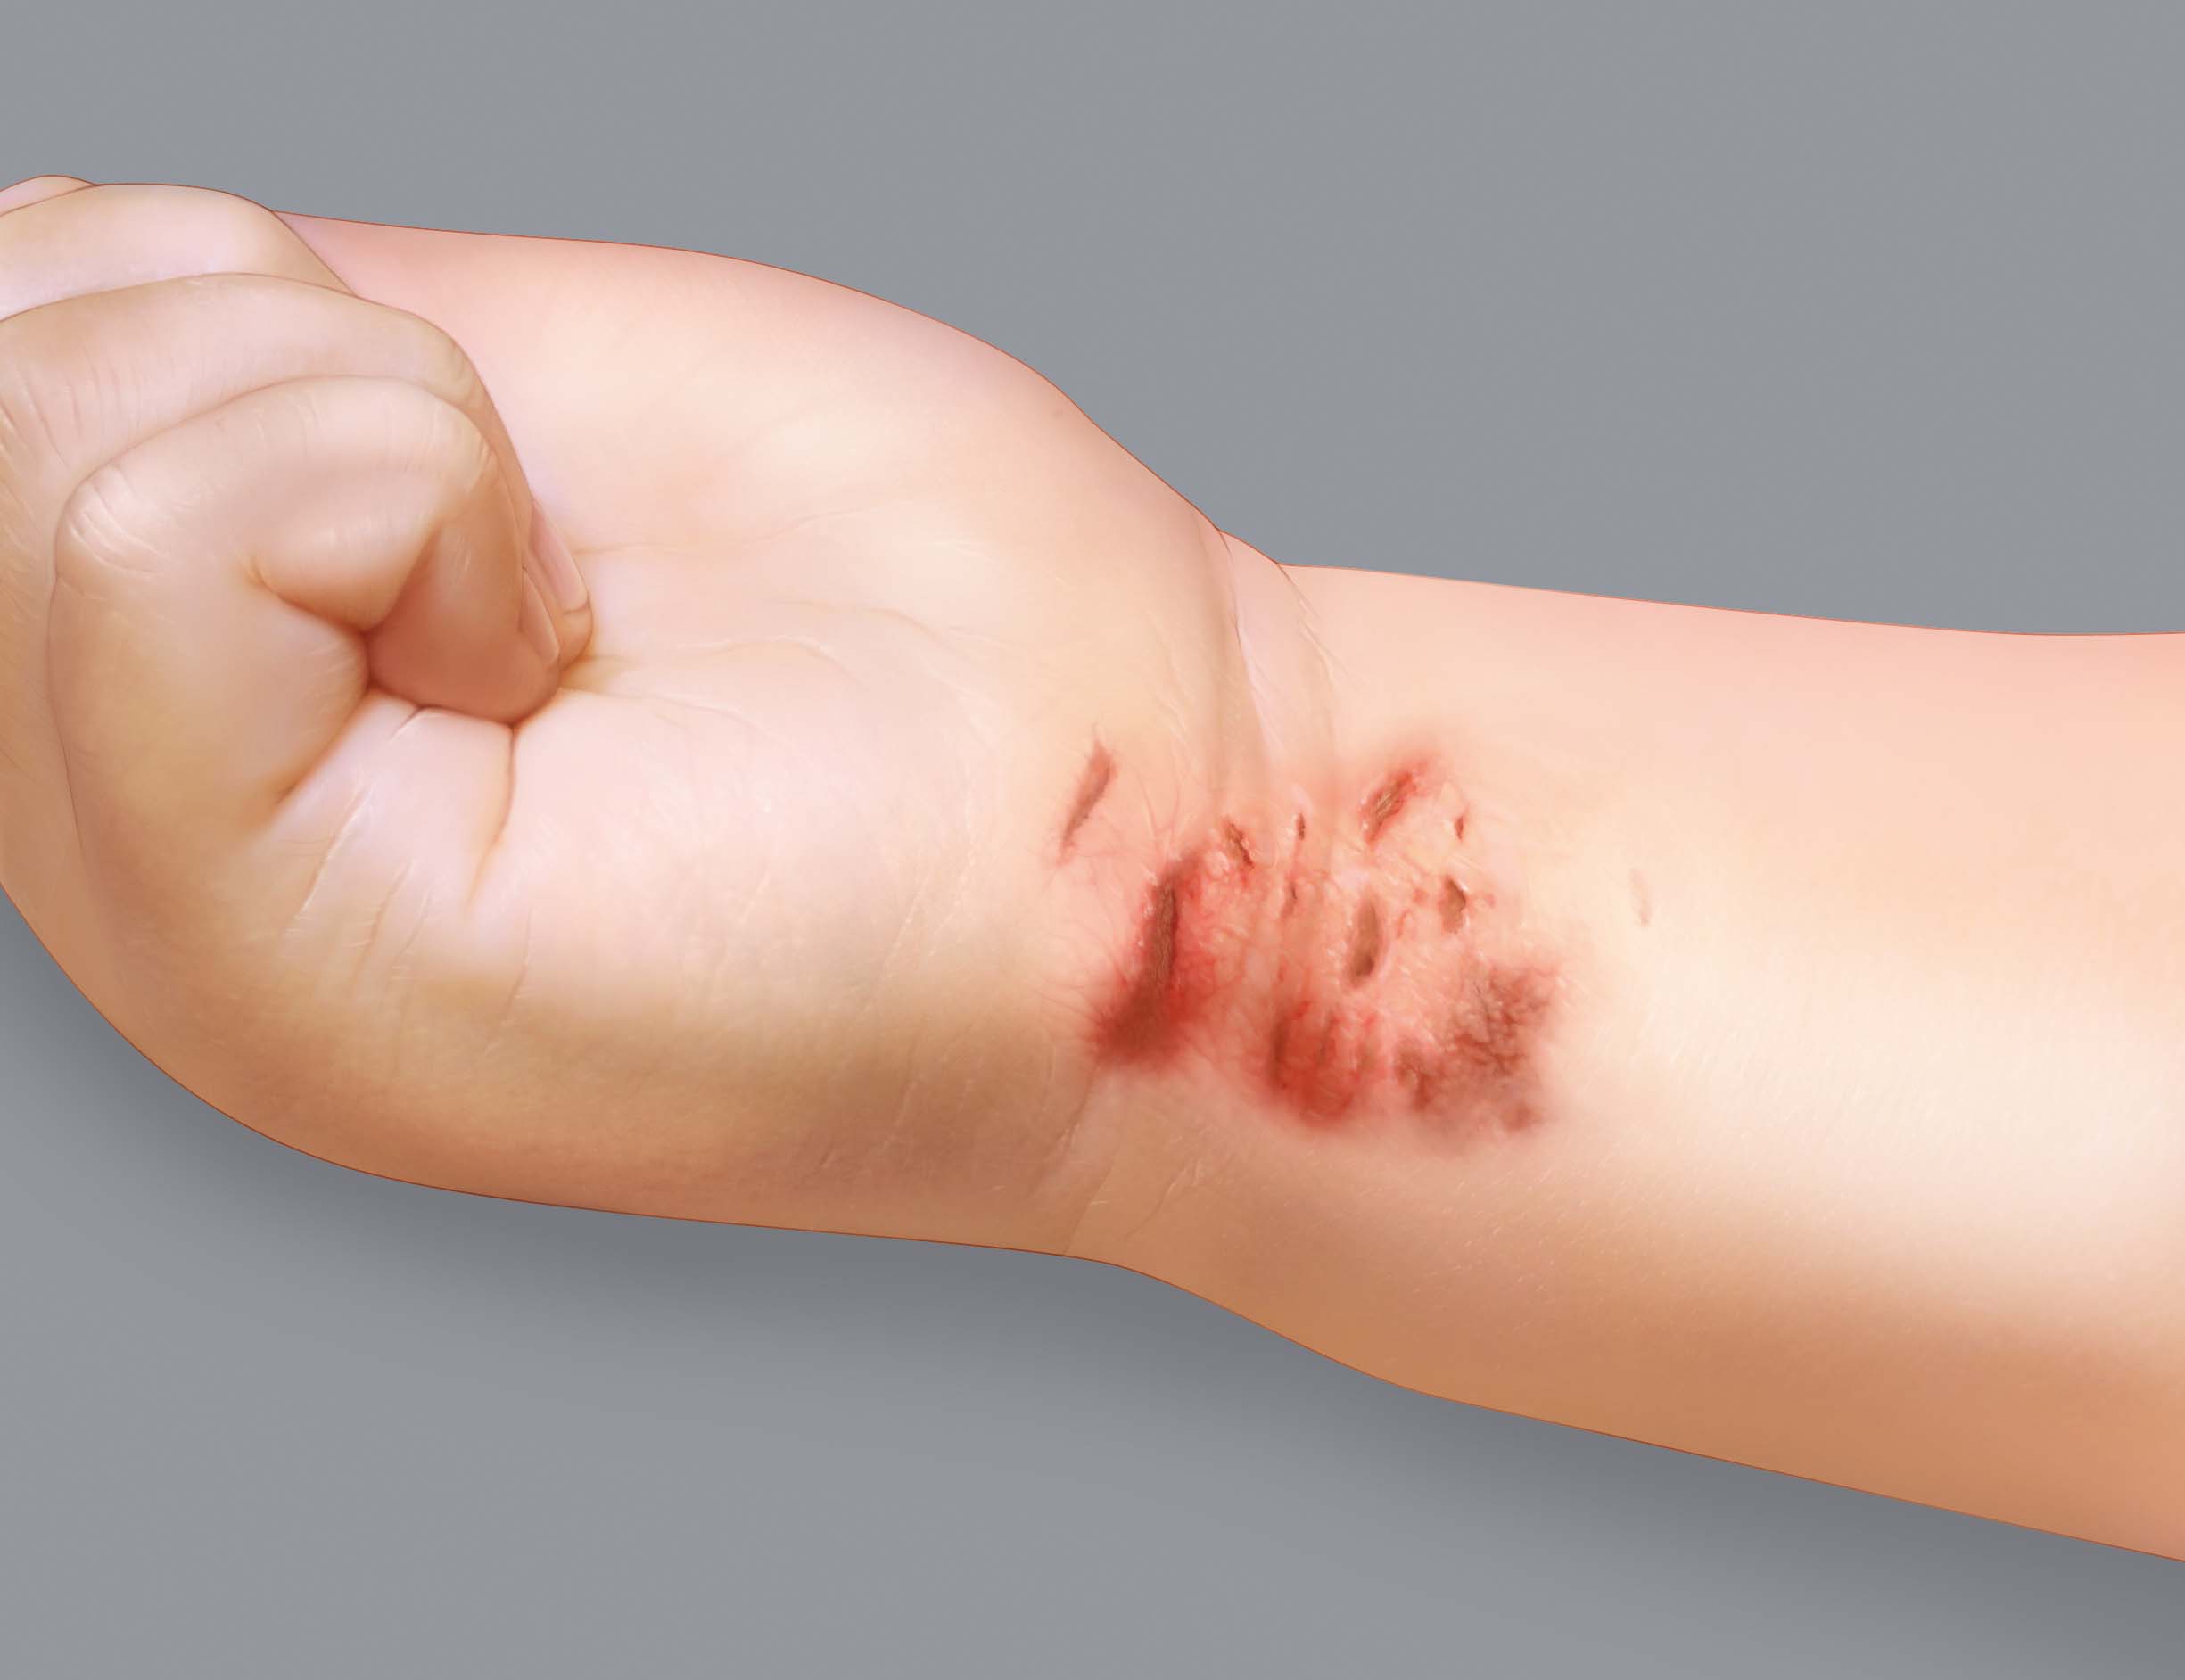 Atopic eczema symptoms: marks from scratching or excoriation